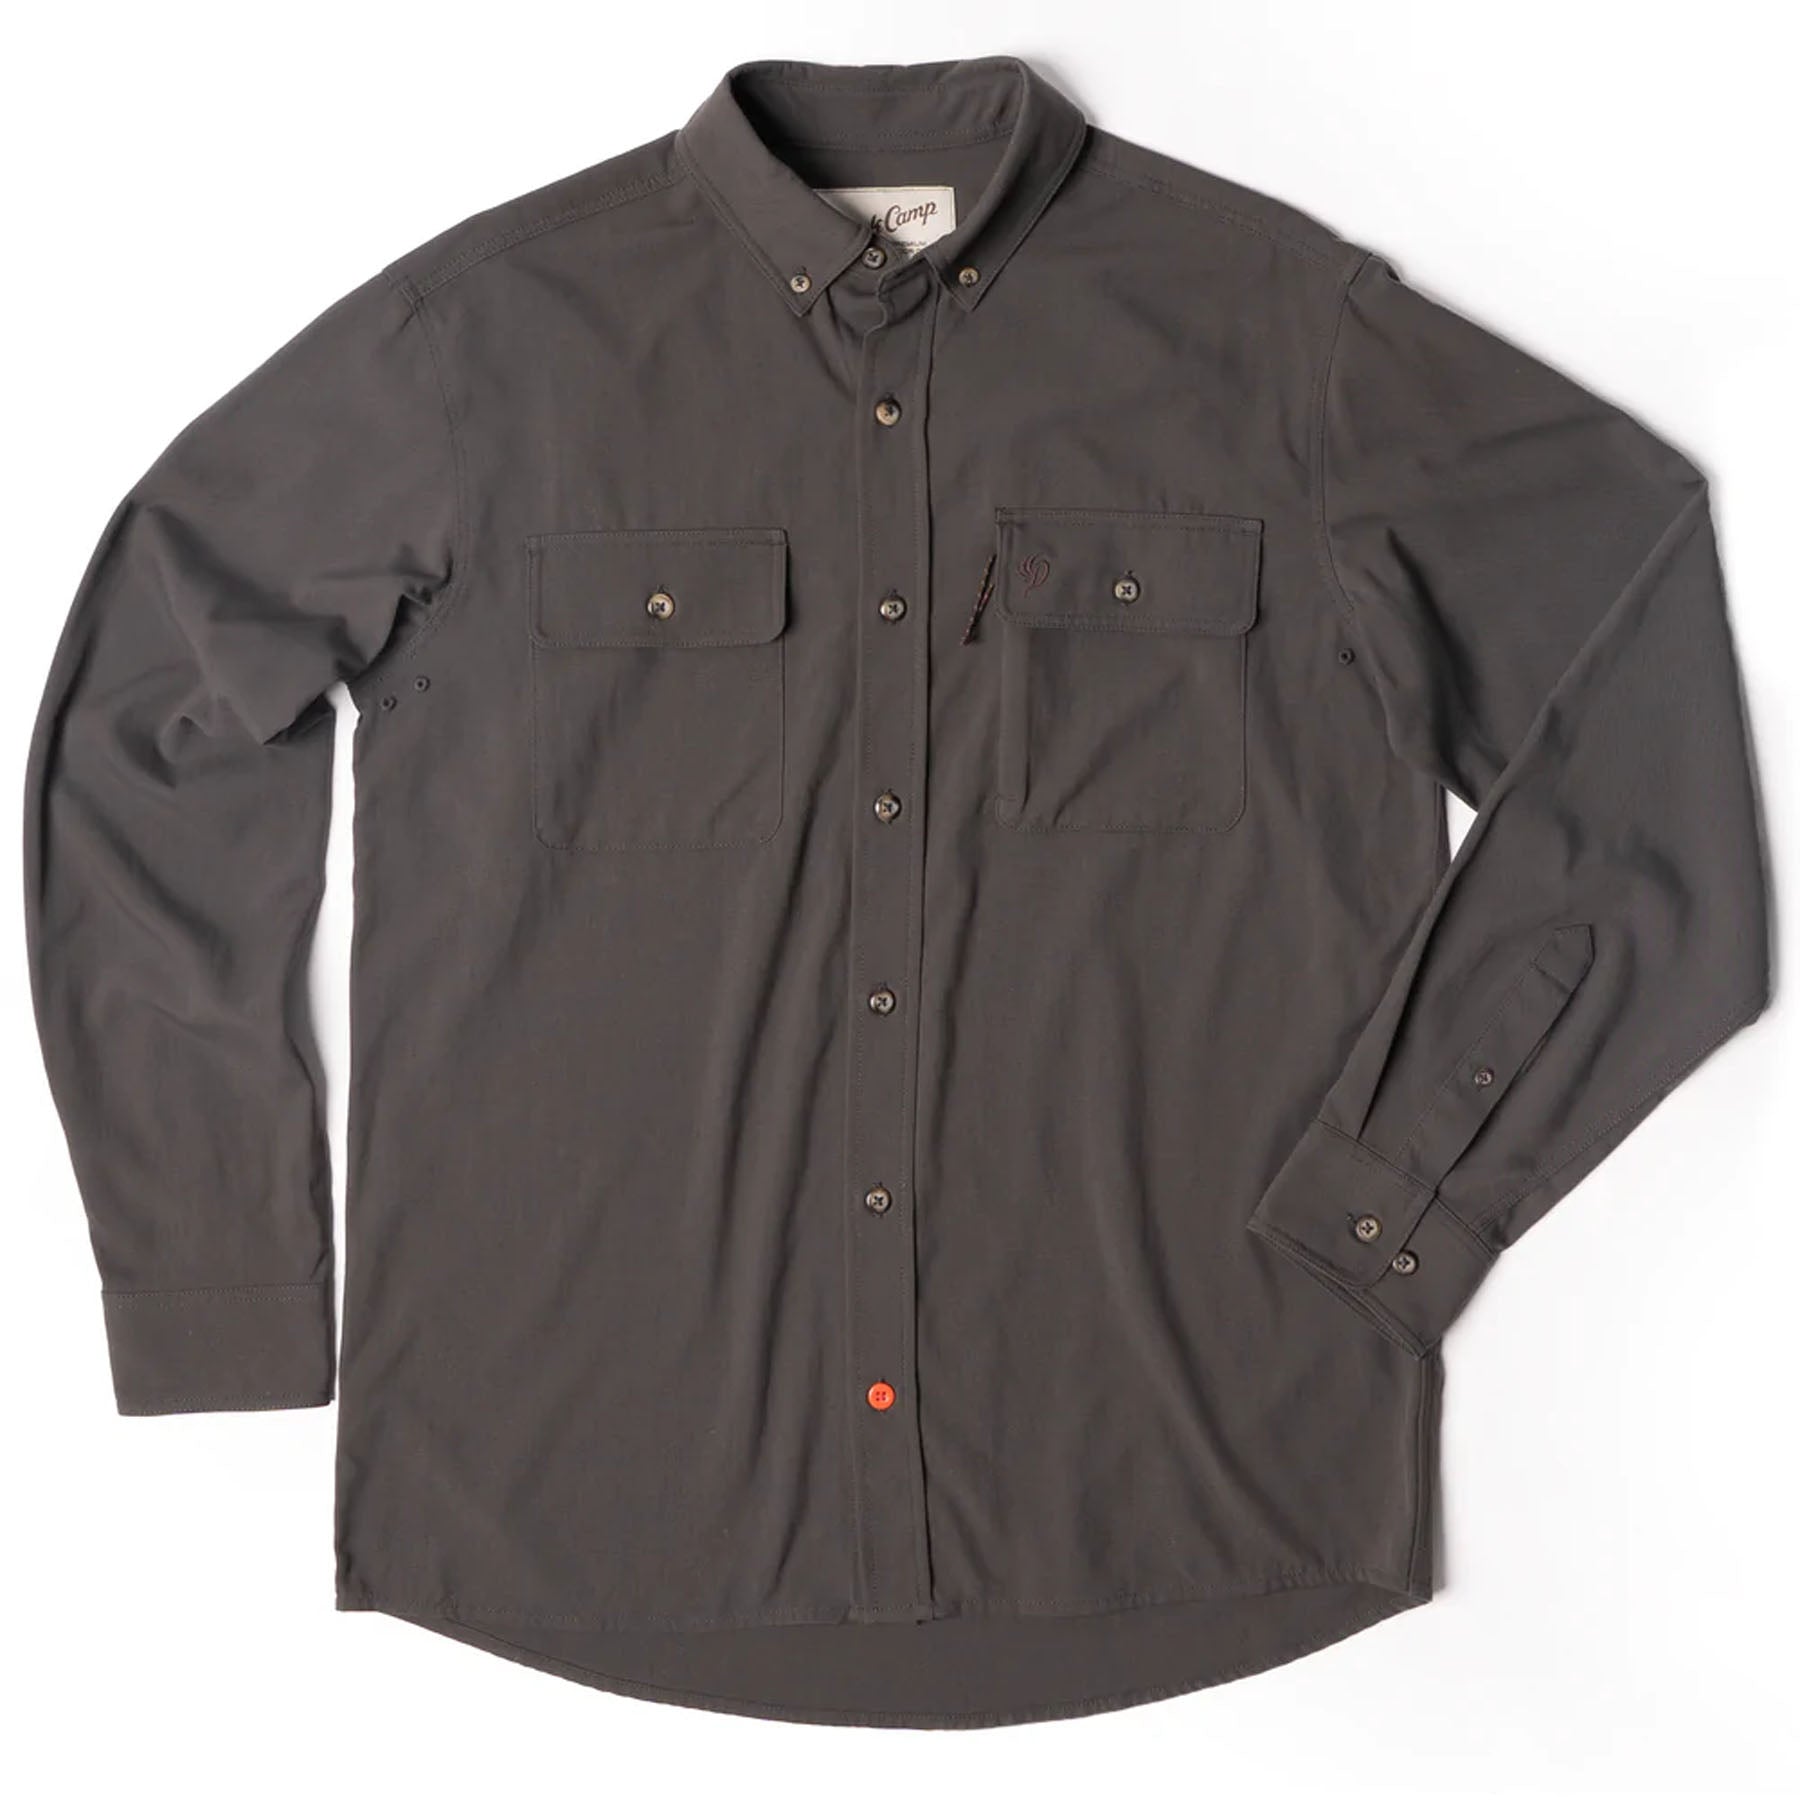 Duck Camp M's Midweight Hunting LS Shirt